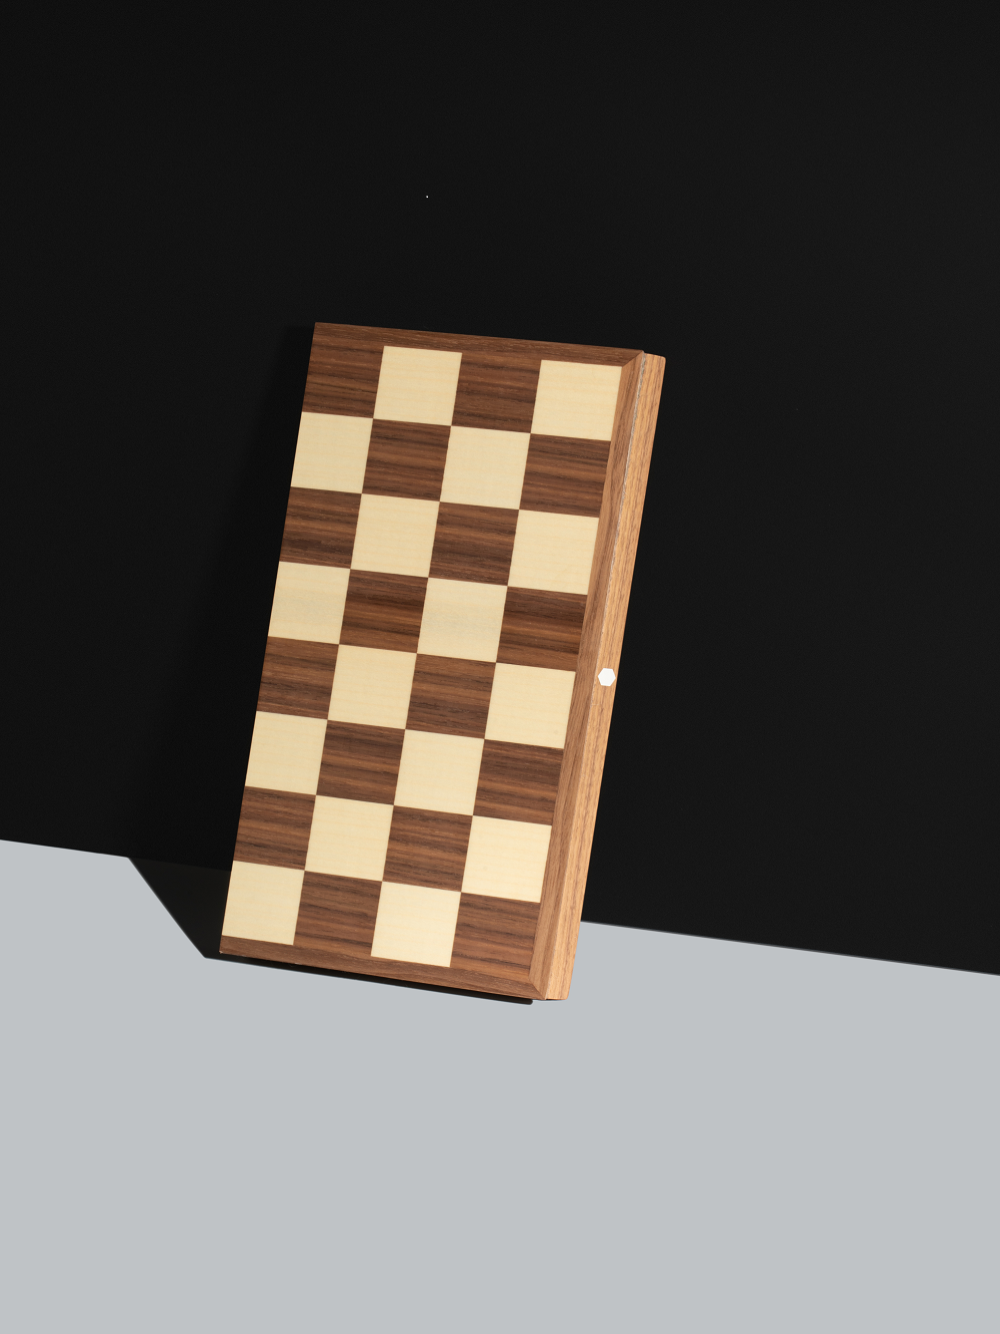 Official Folding Chess Board